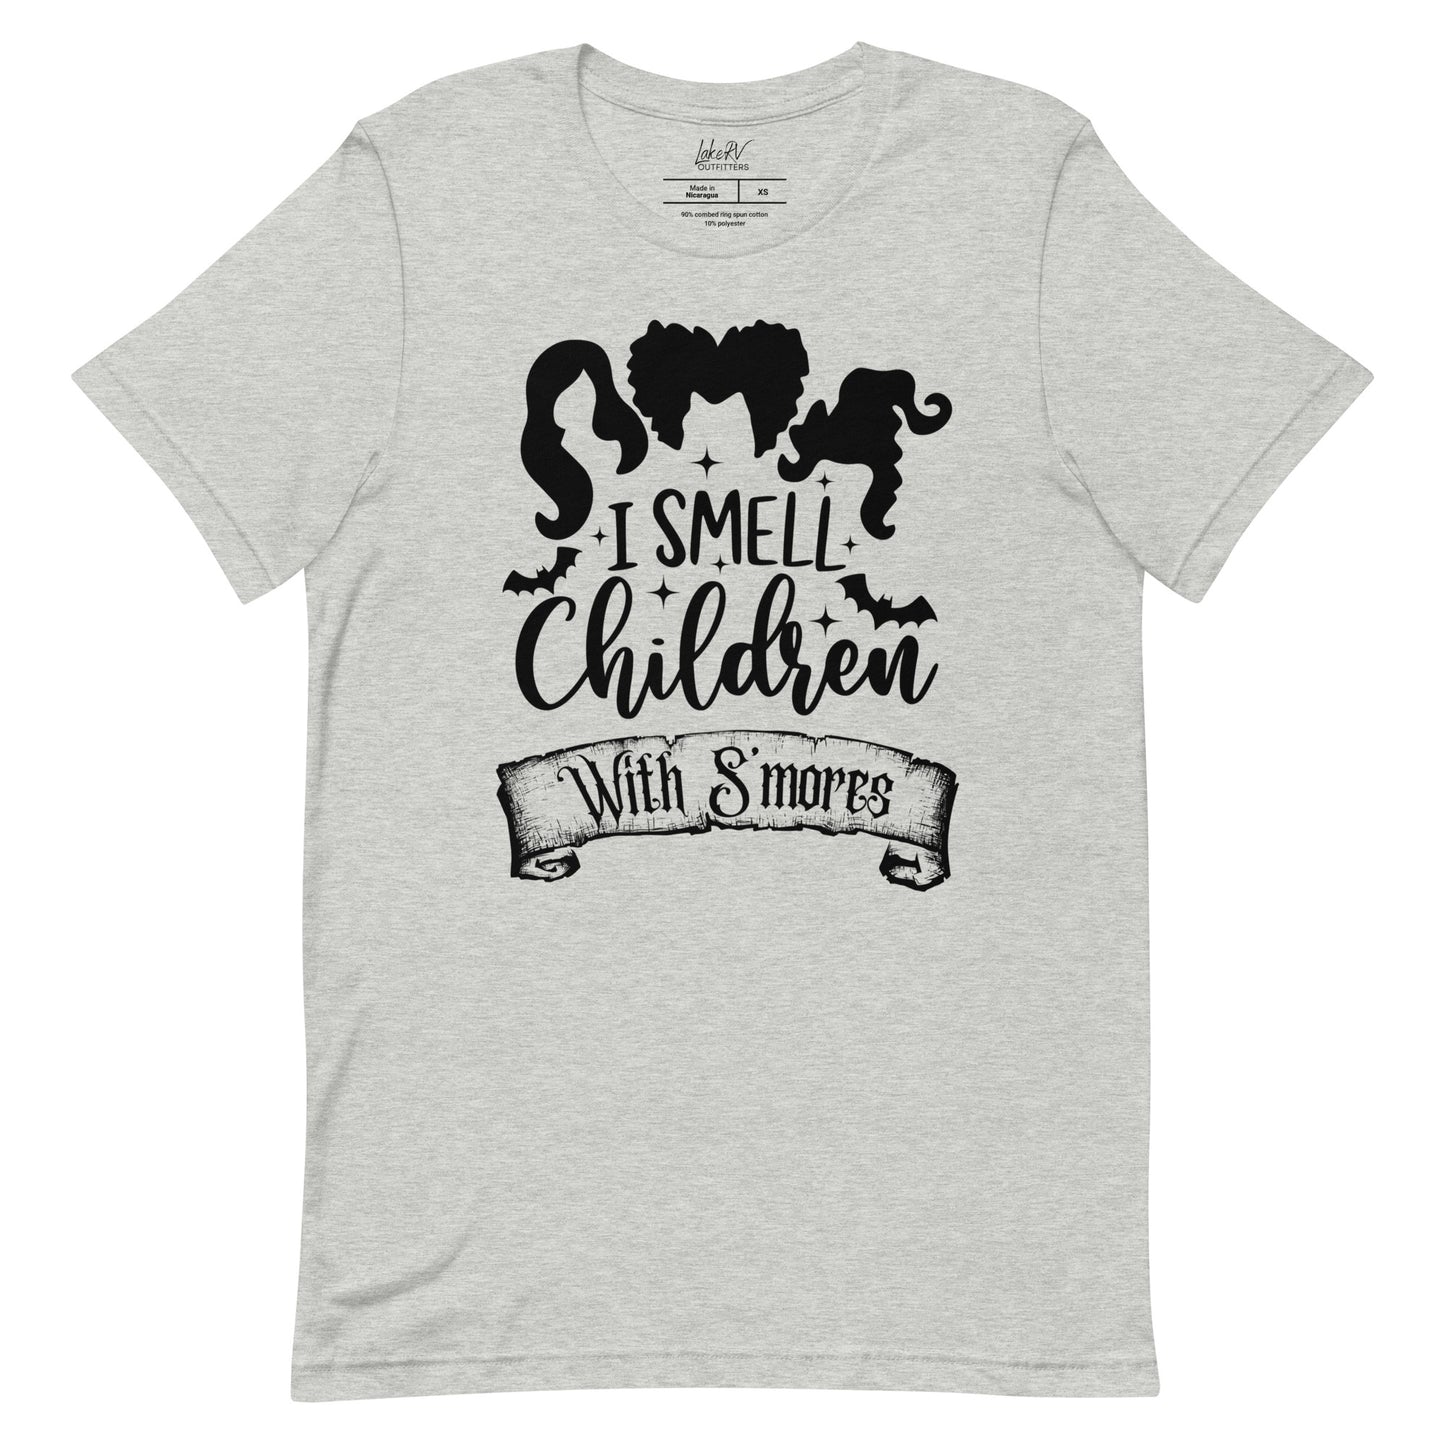 I SMELL CHILDREN WITH S'MORES s/s tee